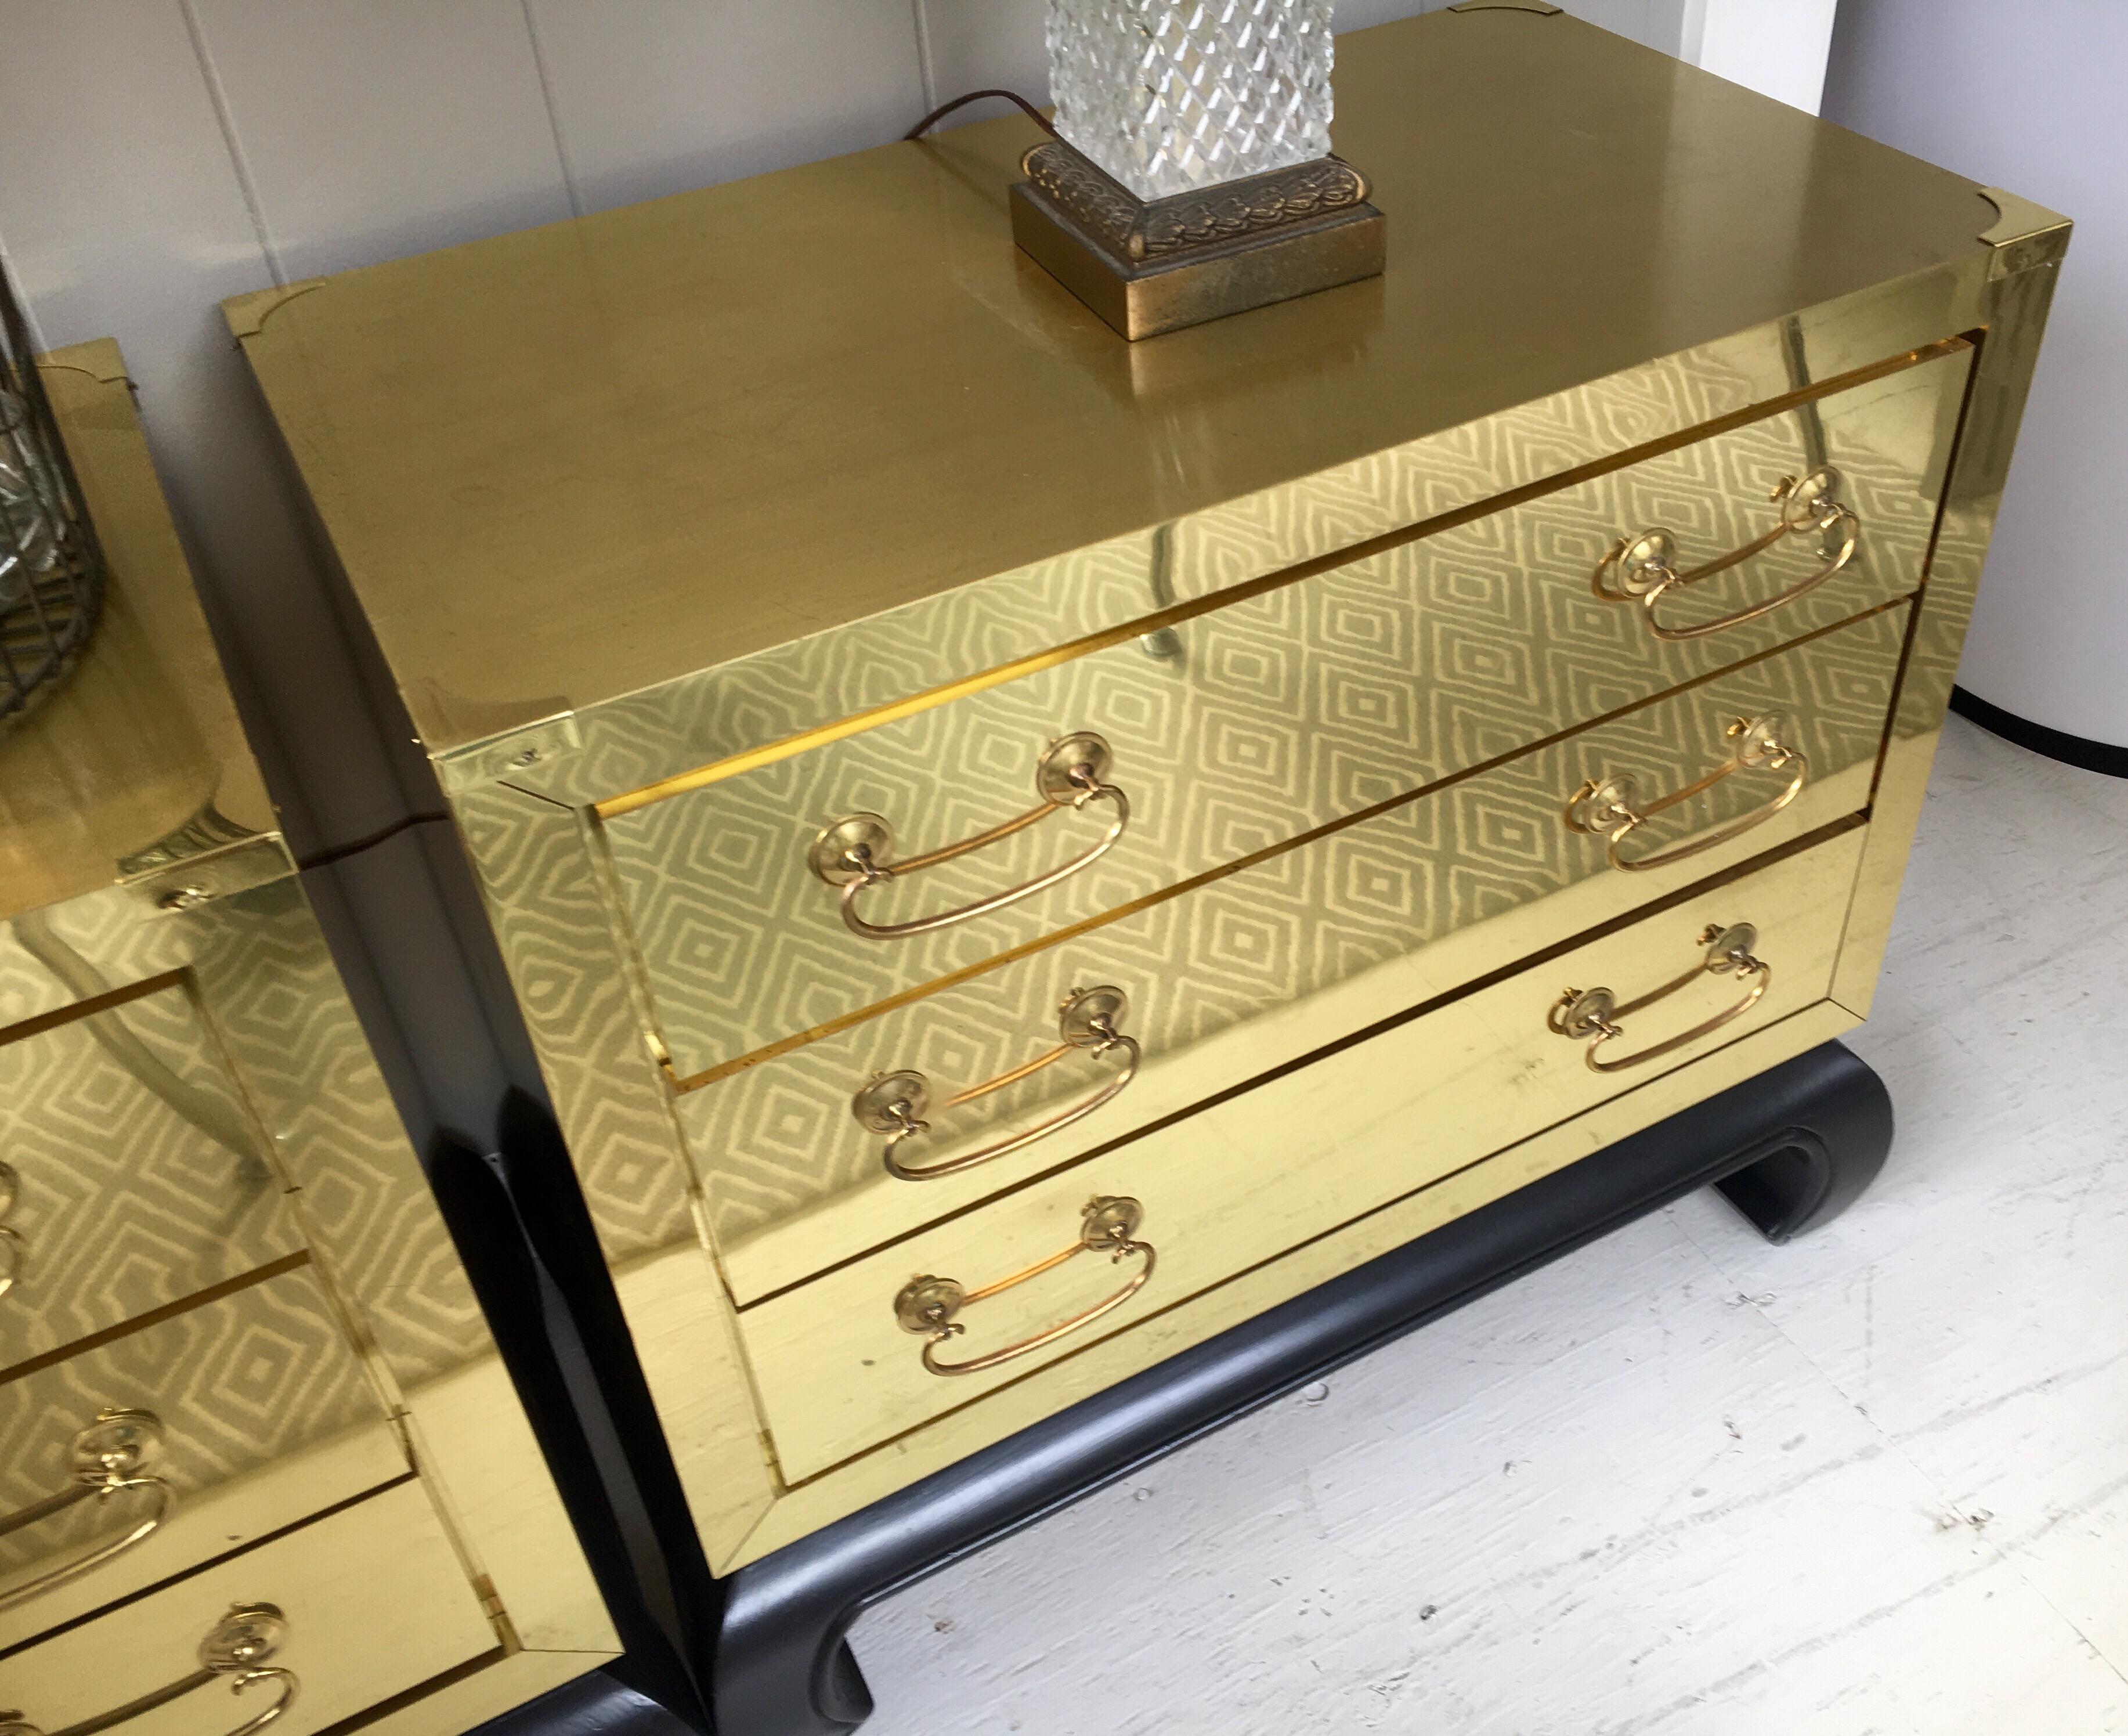 Coveted brass Campaign chest with black base and three drawers. Nothing short of stunning.